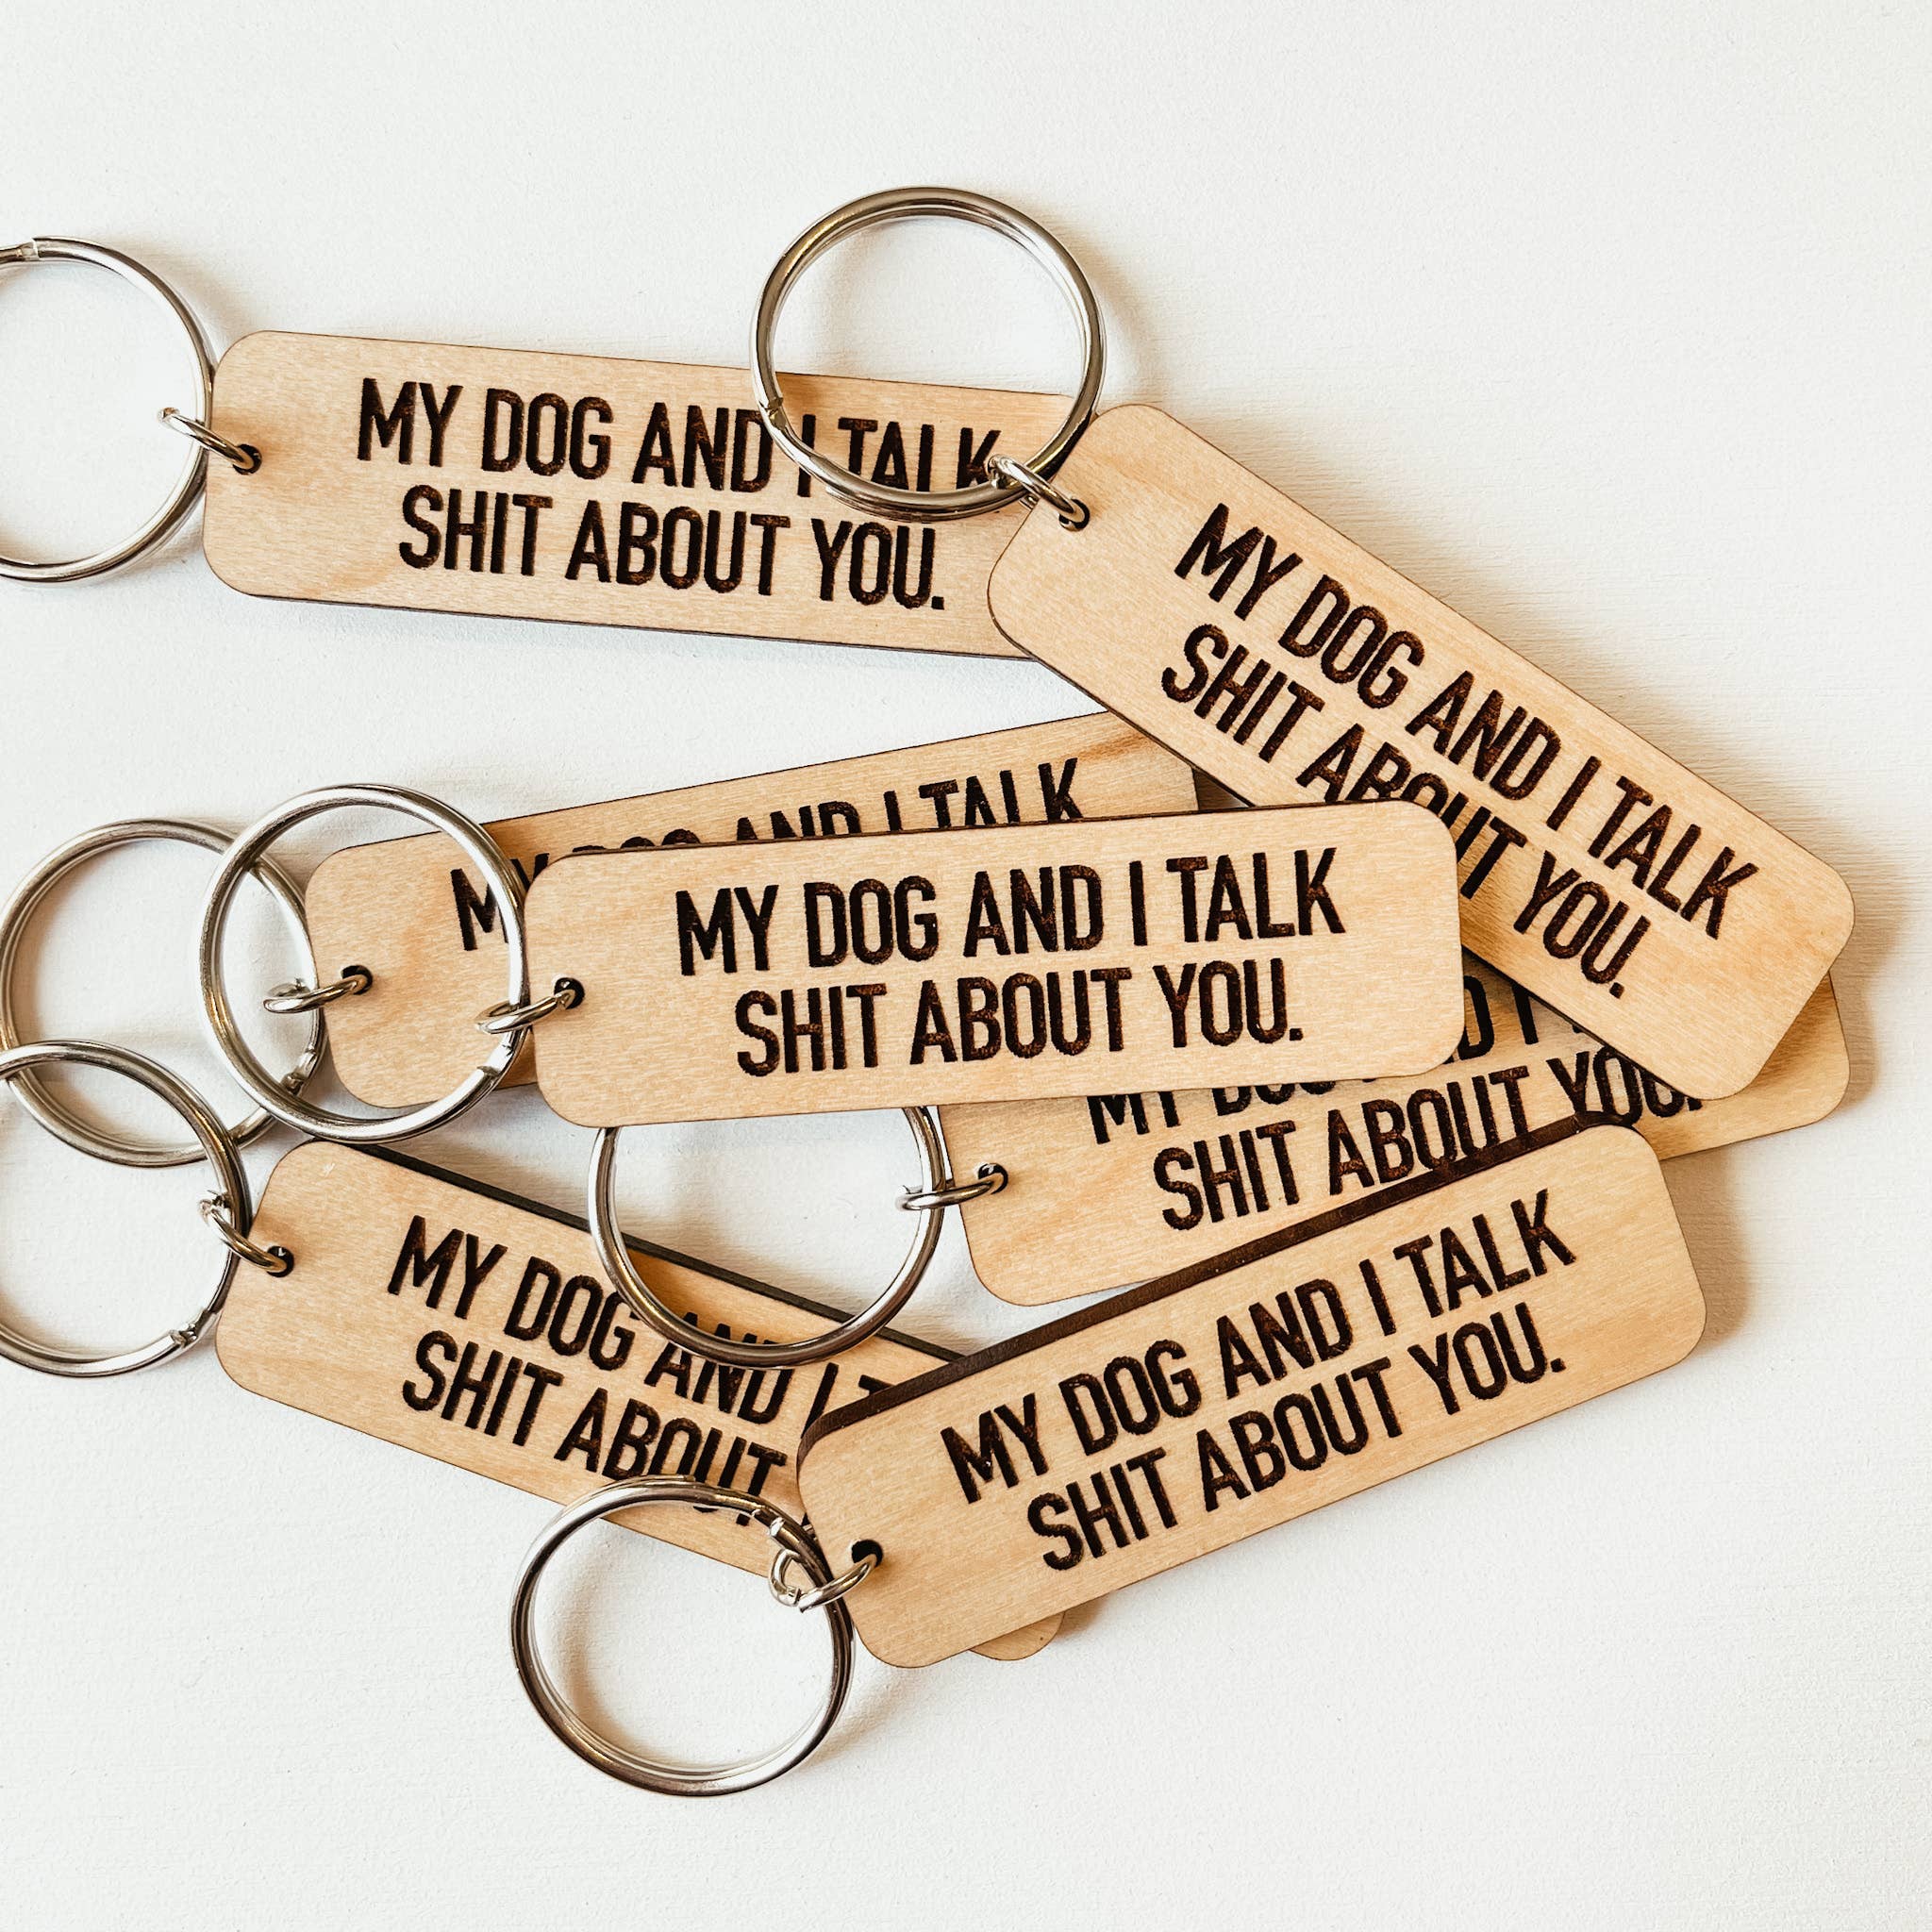 Knotty Design Co. | My Dog And I Talk Shit About You Wooden Keychain